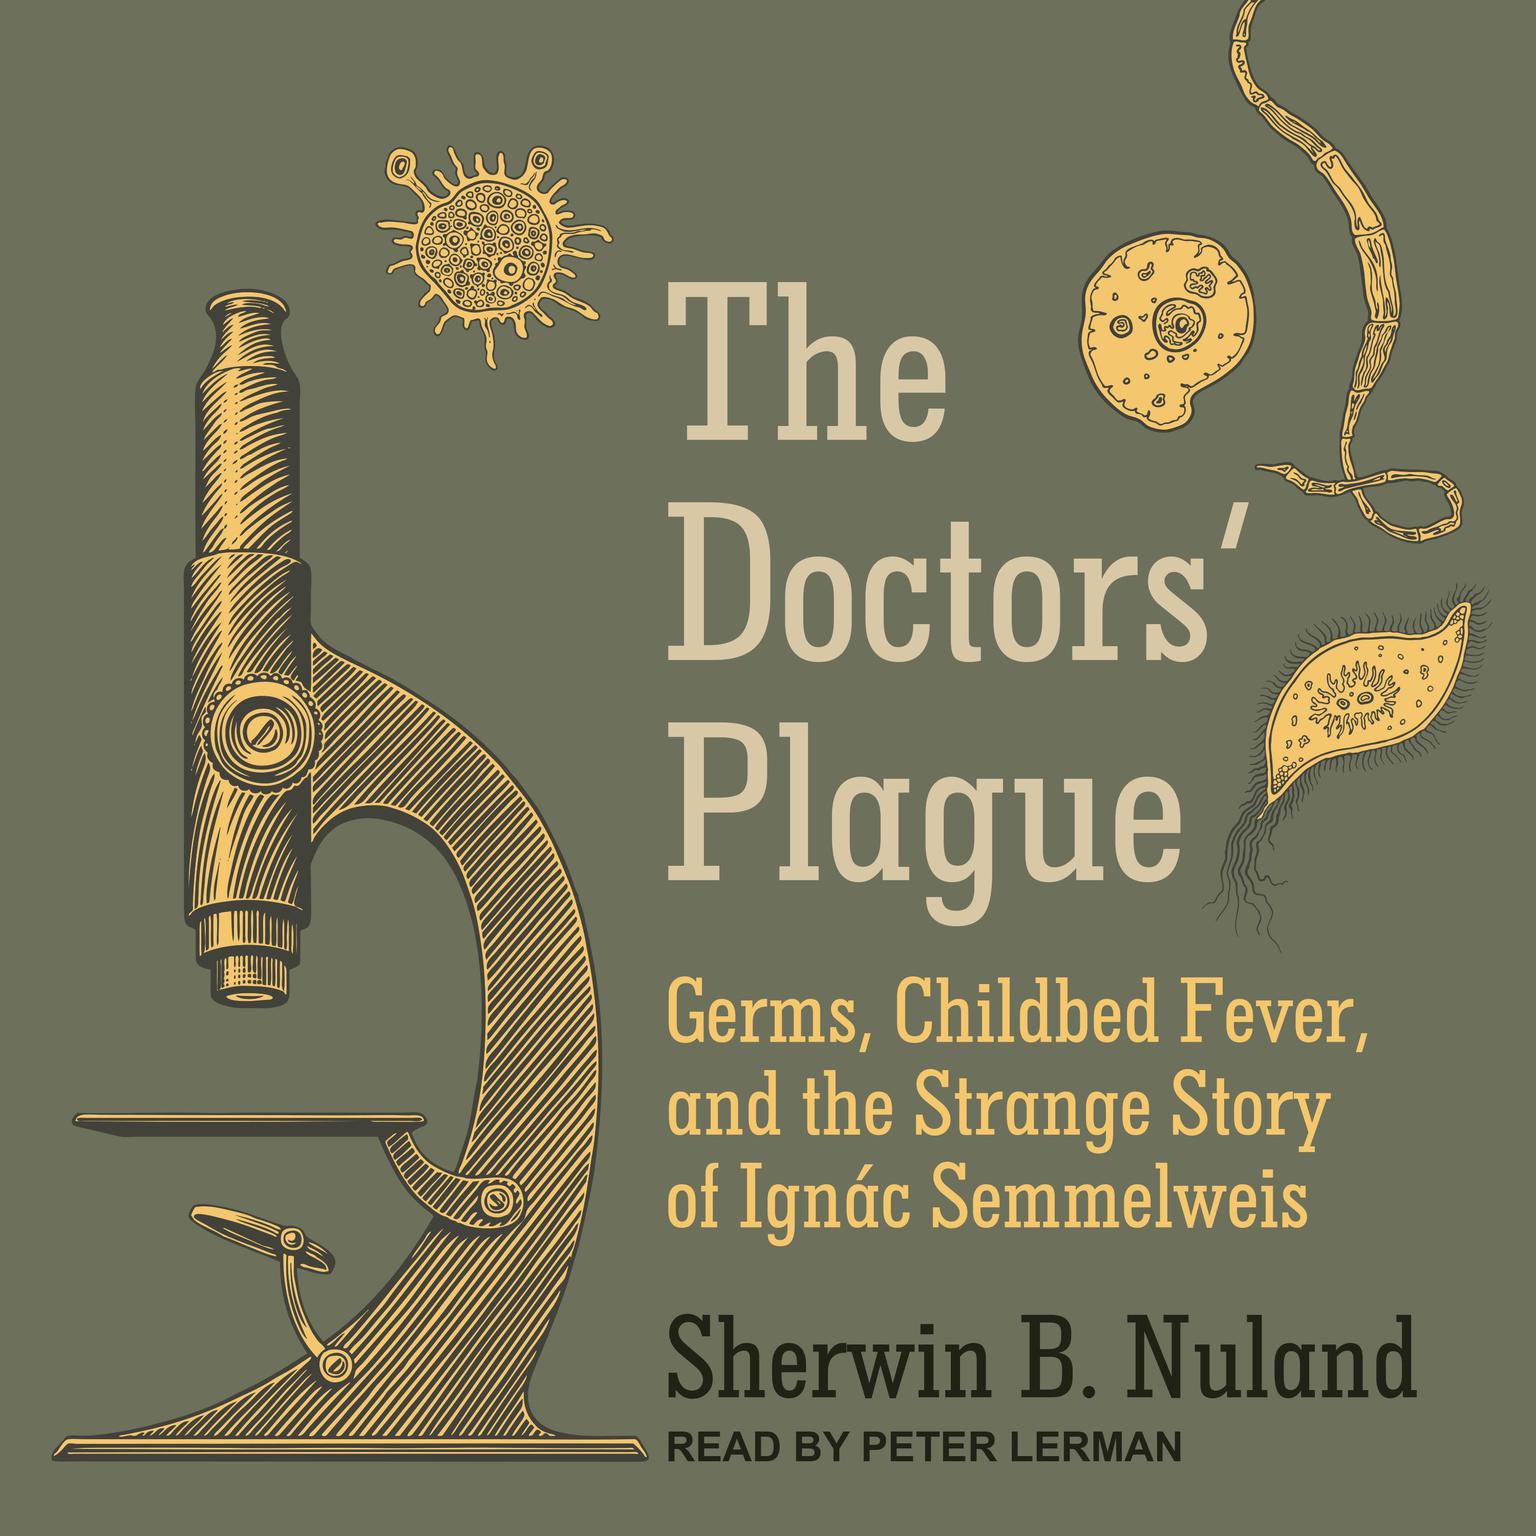 The Doctors Plague: Germs, Childbed Fever, and the Strange Story of Ignac Semmelweis Audiobook, by Sherwin B. Nuland